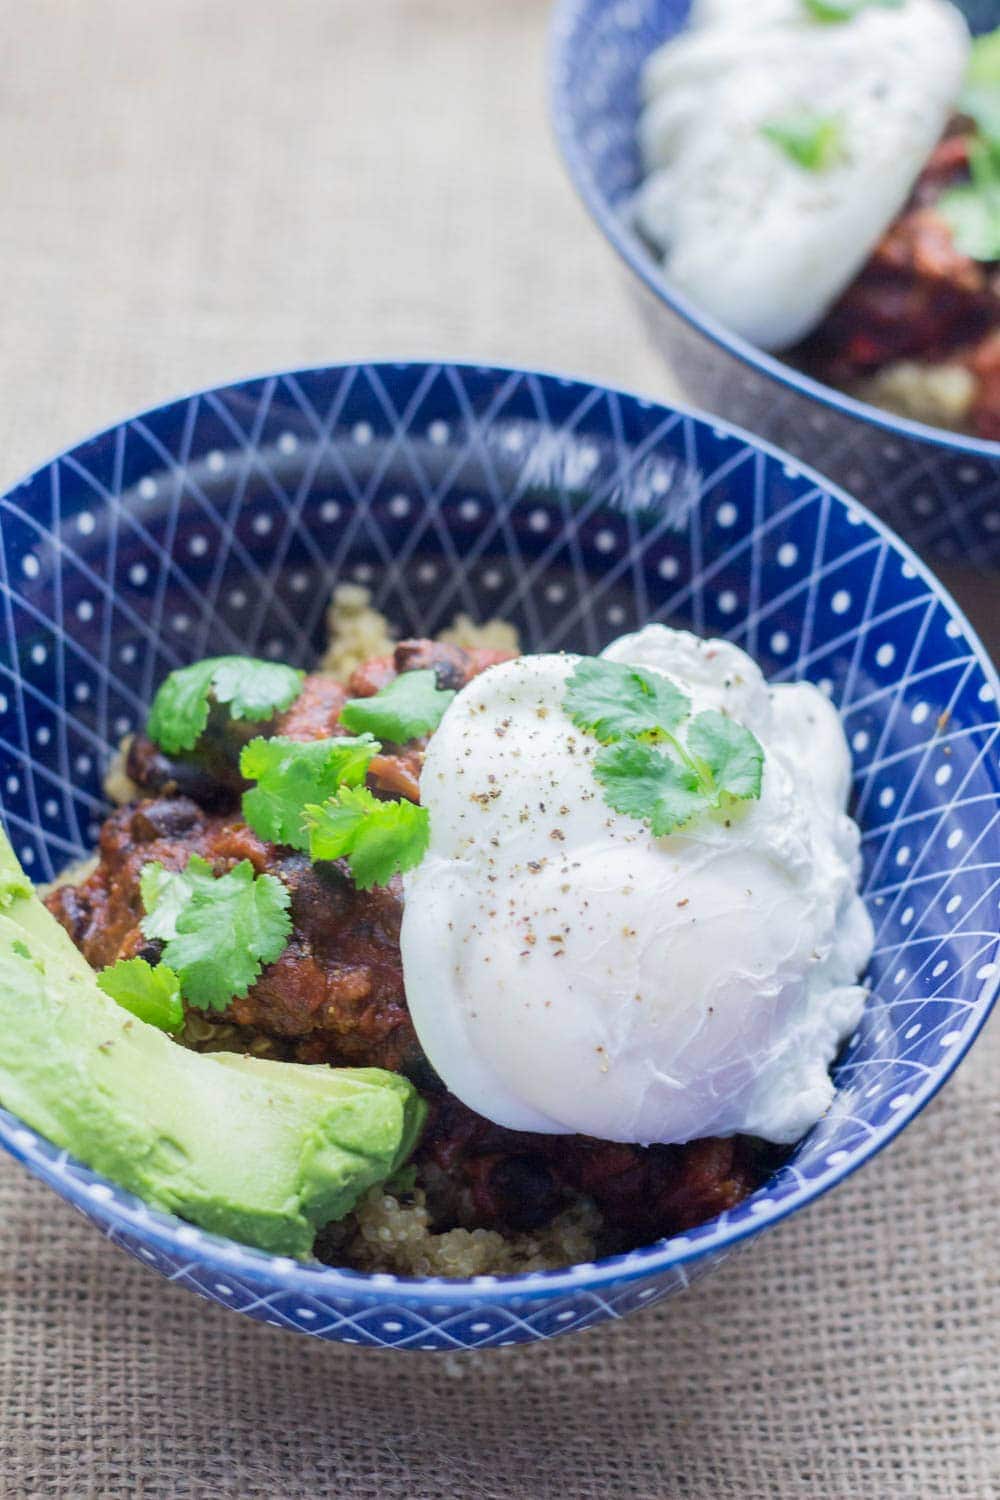 Huevos Rancheros Quinoa Breakfast Bowls. Try these huevos rancheros quinoa breakfast bowls for a fun and healthy change to your usual breakfast. I like mine topped with a poached egg for extra protein and loads of lime and coriander. #breakfast #quinoa #healthy #huevosrancheros #recipe